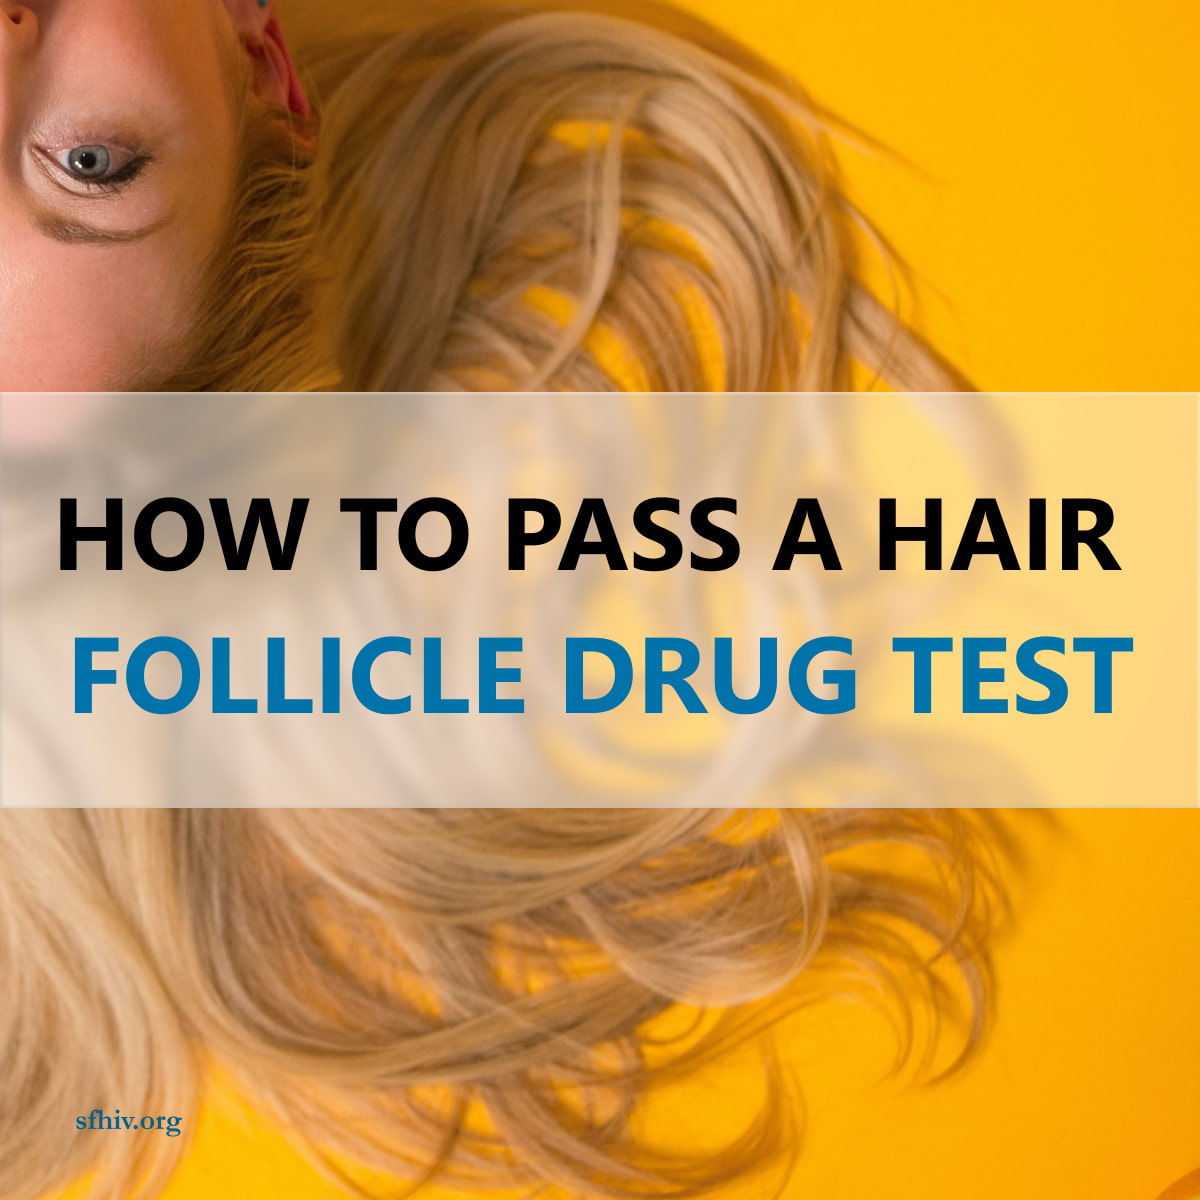 How To Pass a Hair Follicle Drug Test